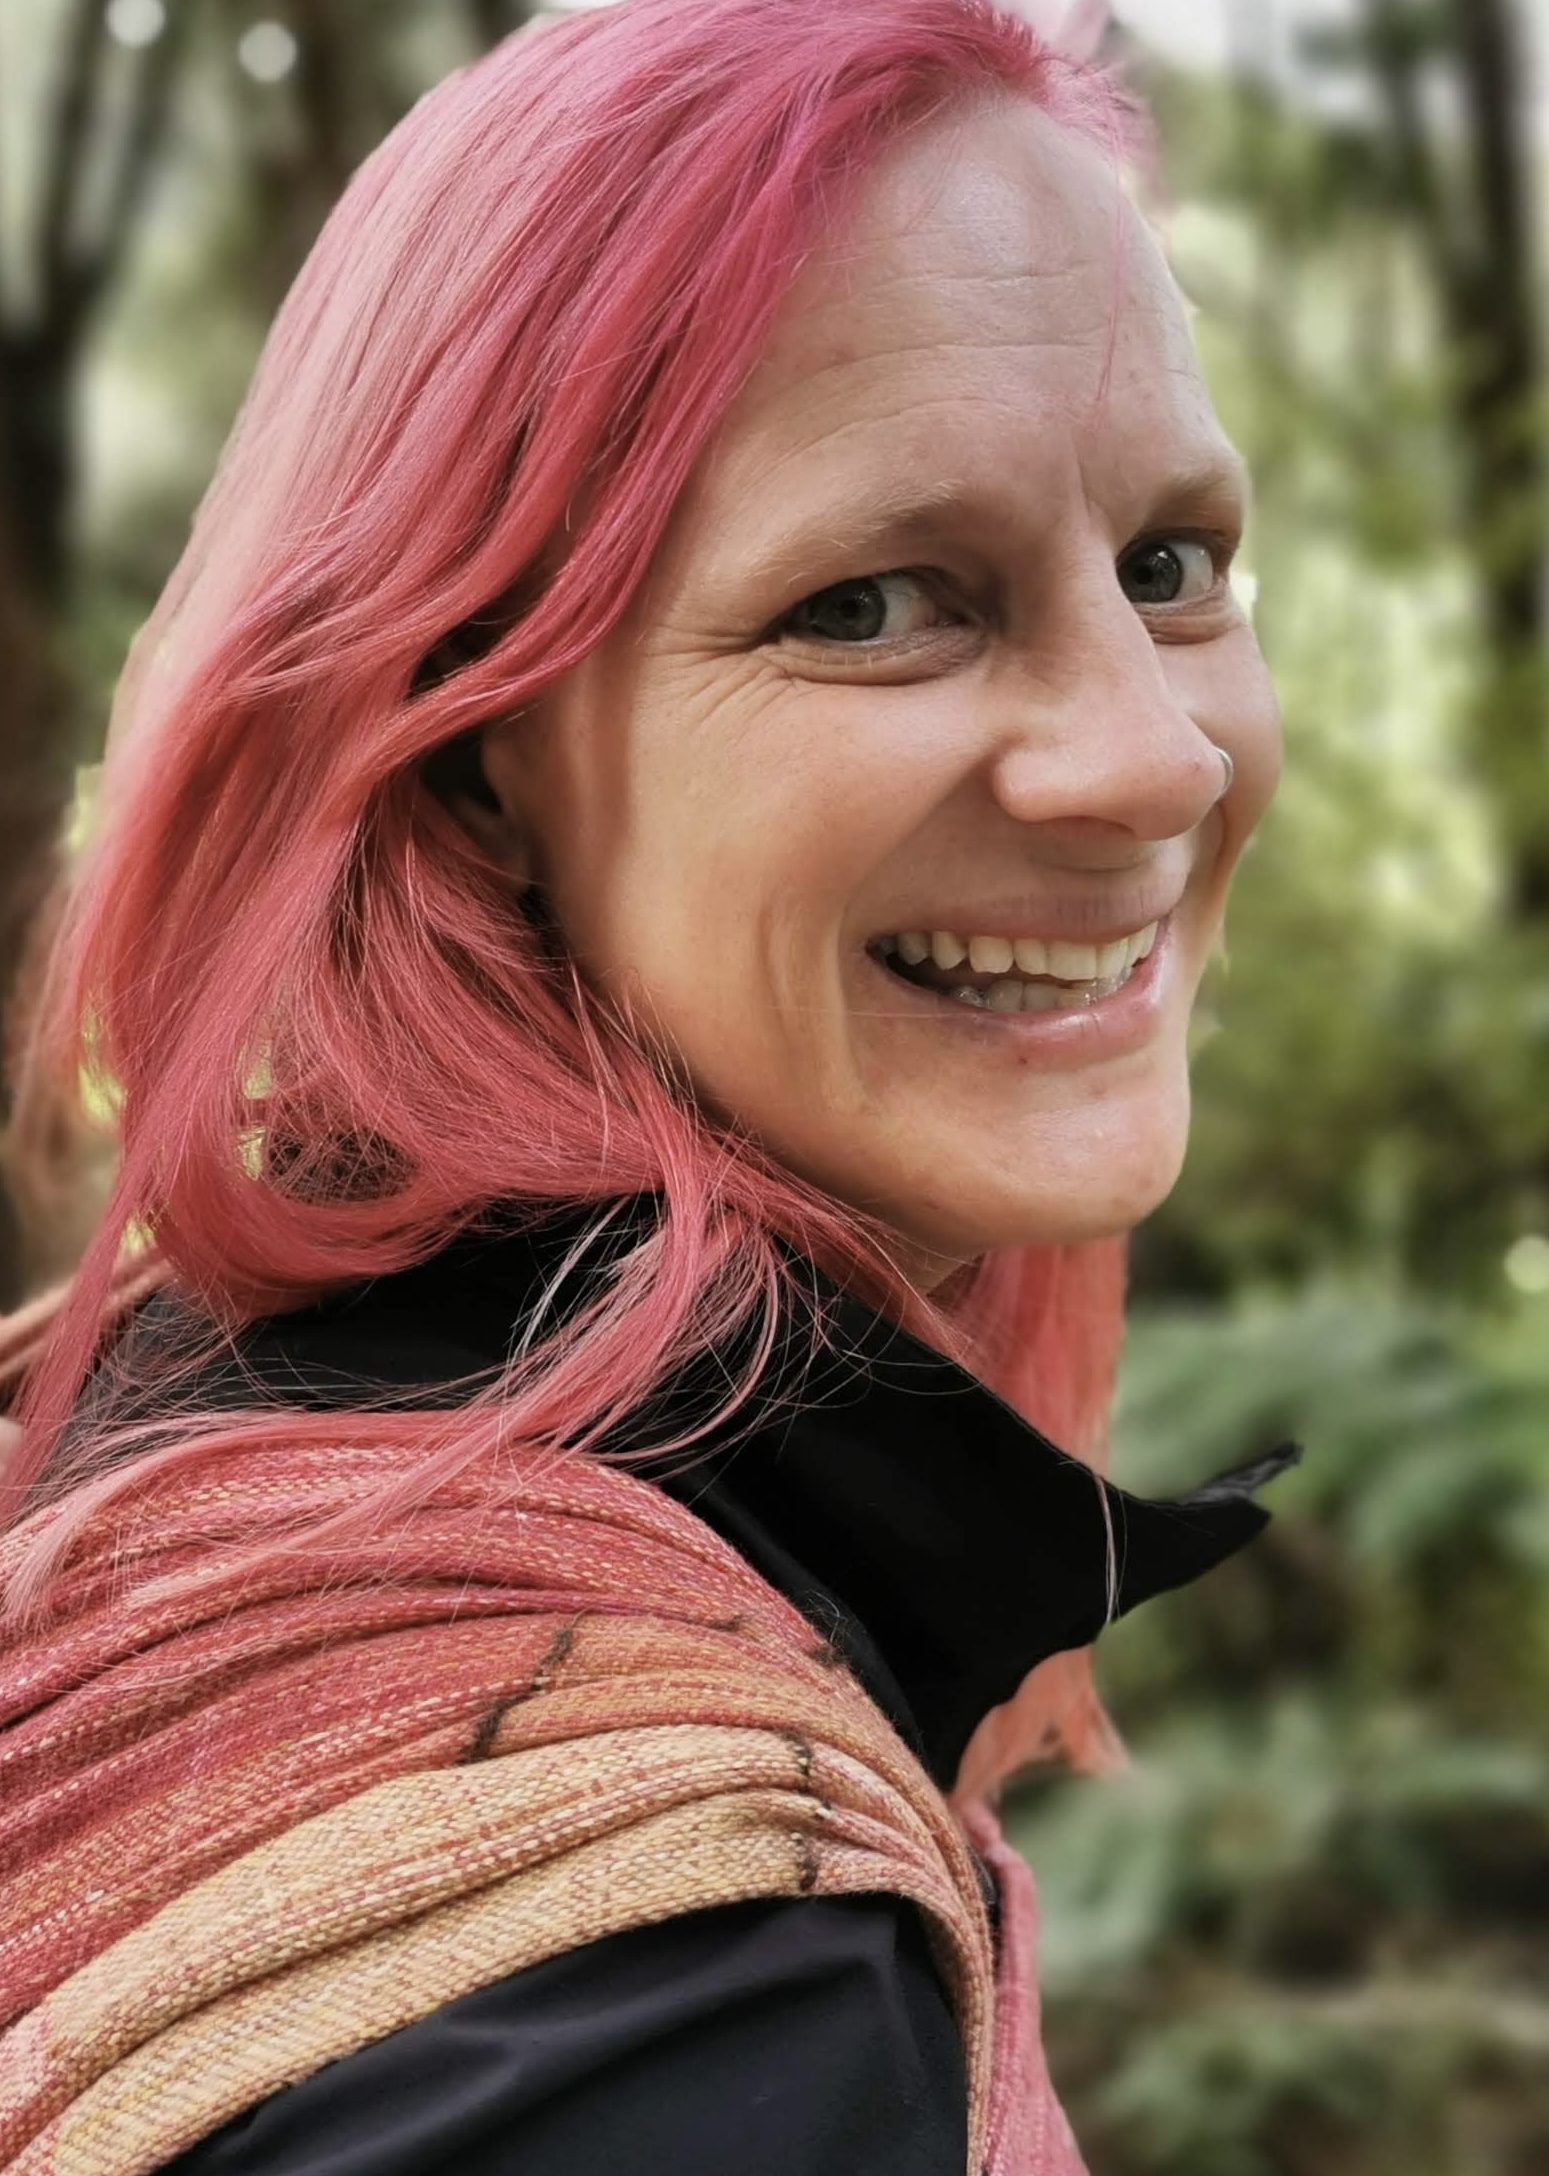 Image of Annelies Judson, pink-haired Pakeha woman who is probably in her mid-to-late 30s based on the lines beginning to form where she has frowned at too many bum jokes.